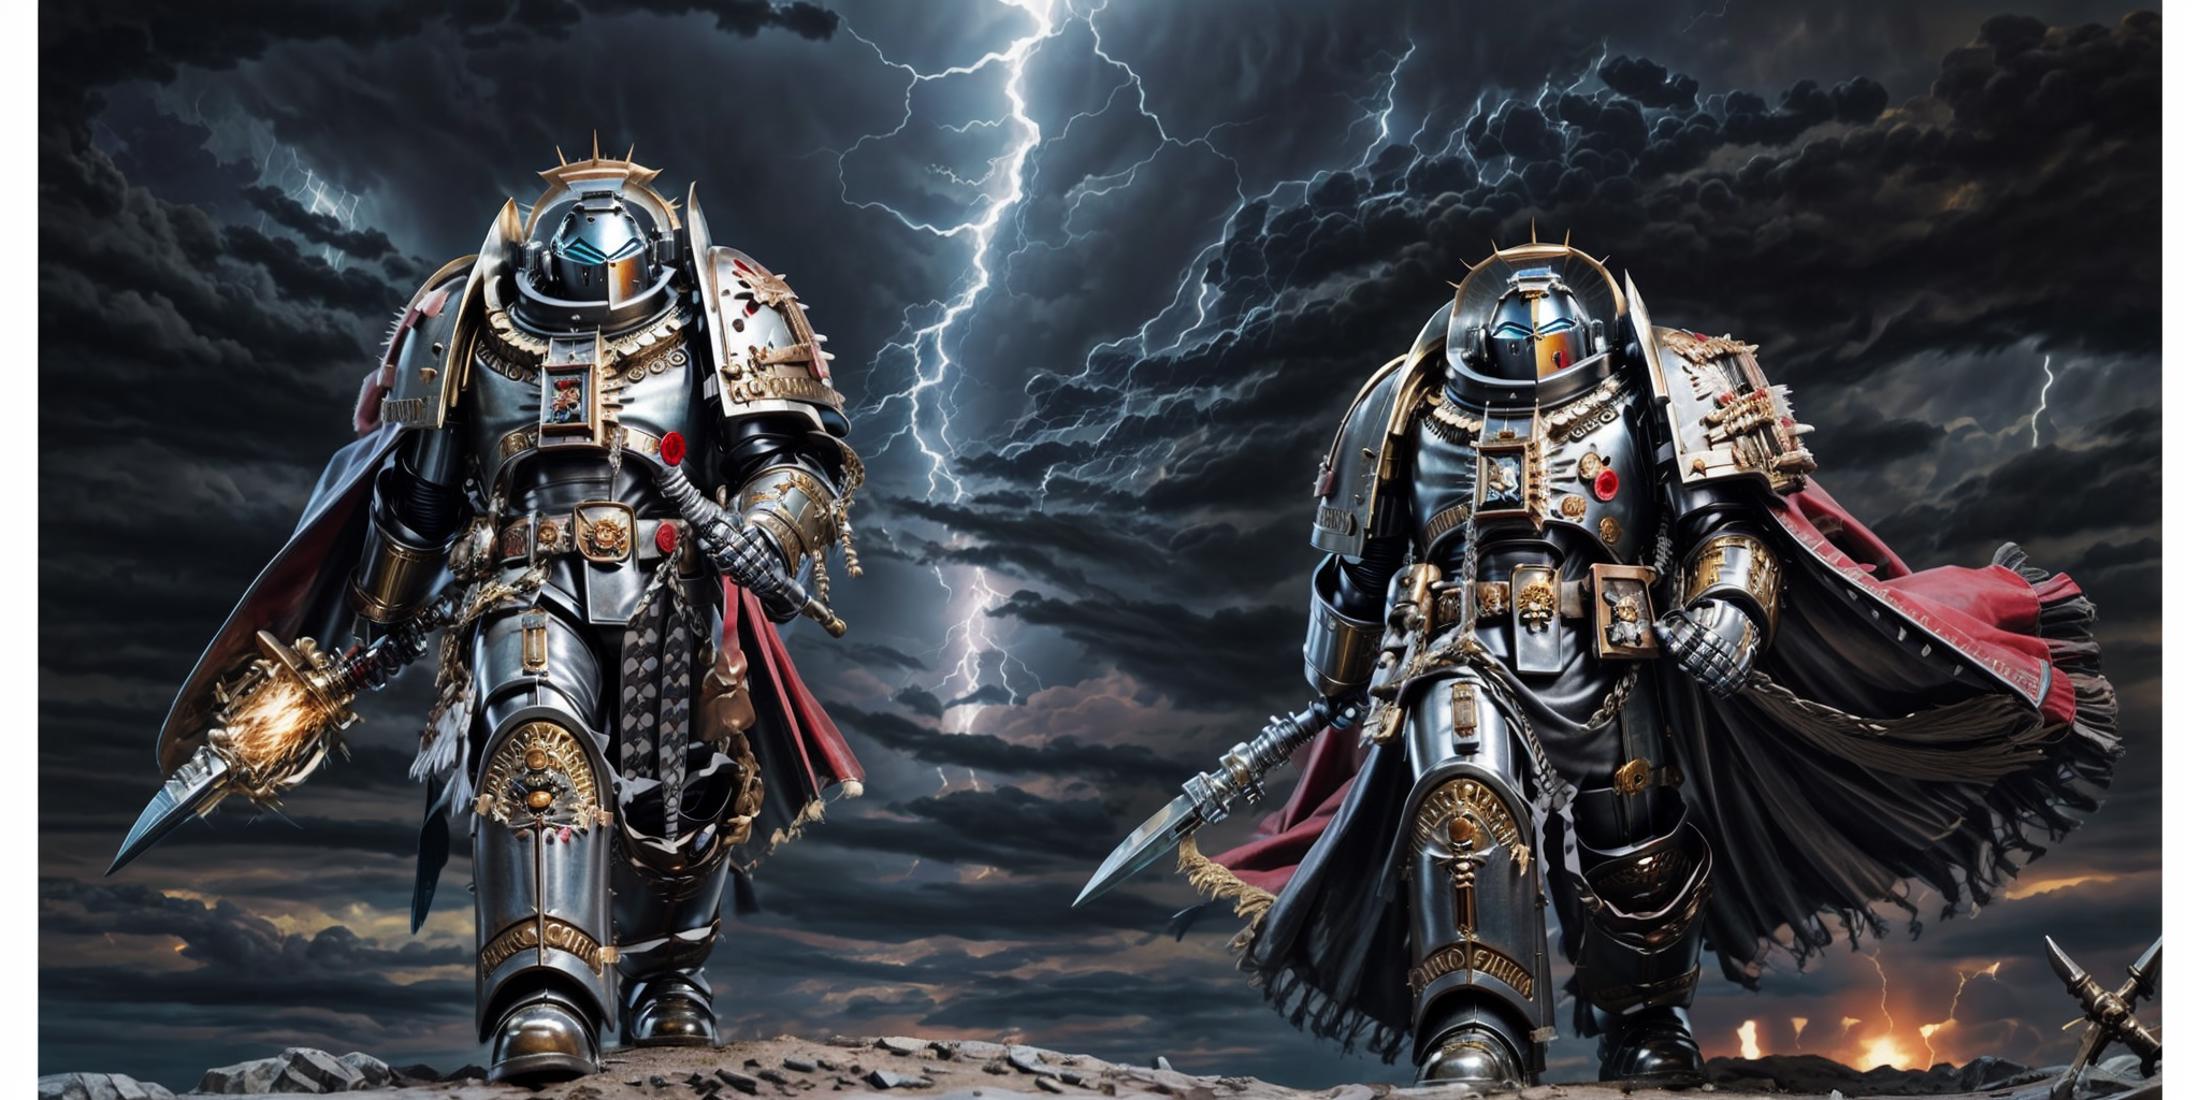 The Grey Knights image by Dercius